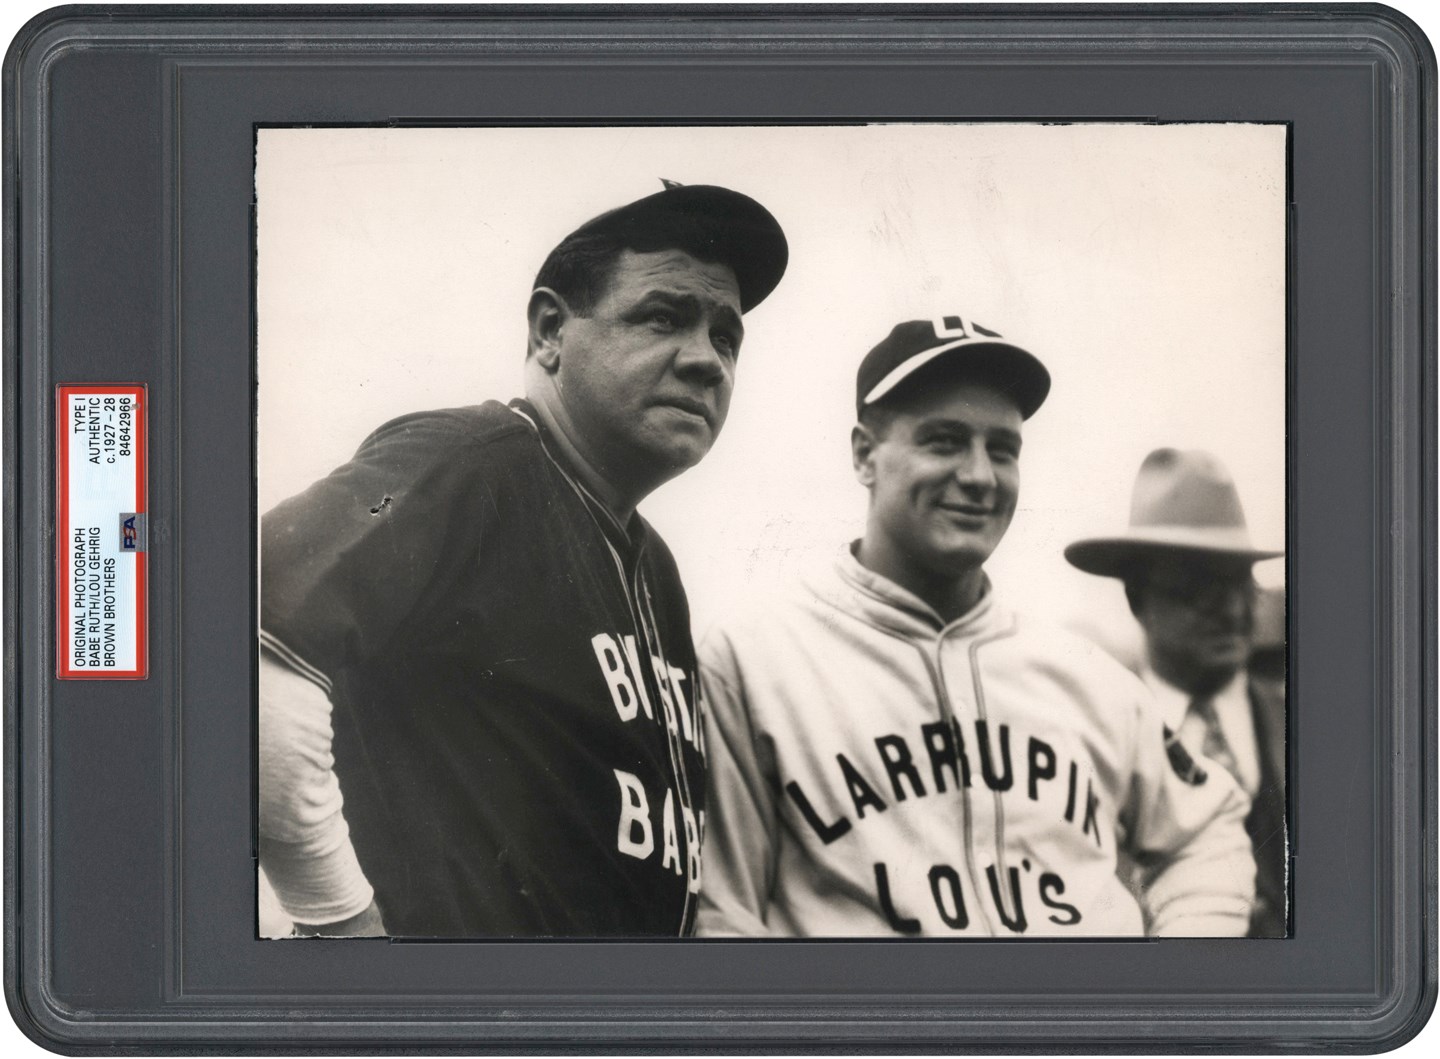 The Brown Brothers Photograph Collection - Circa 1927 Babe Ruth and Lou Gehrig Barnstorming Tour Photograph (PSA Type I)